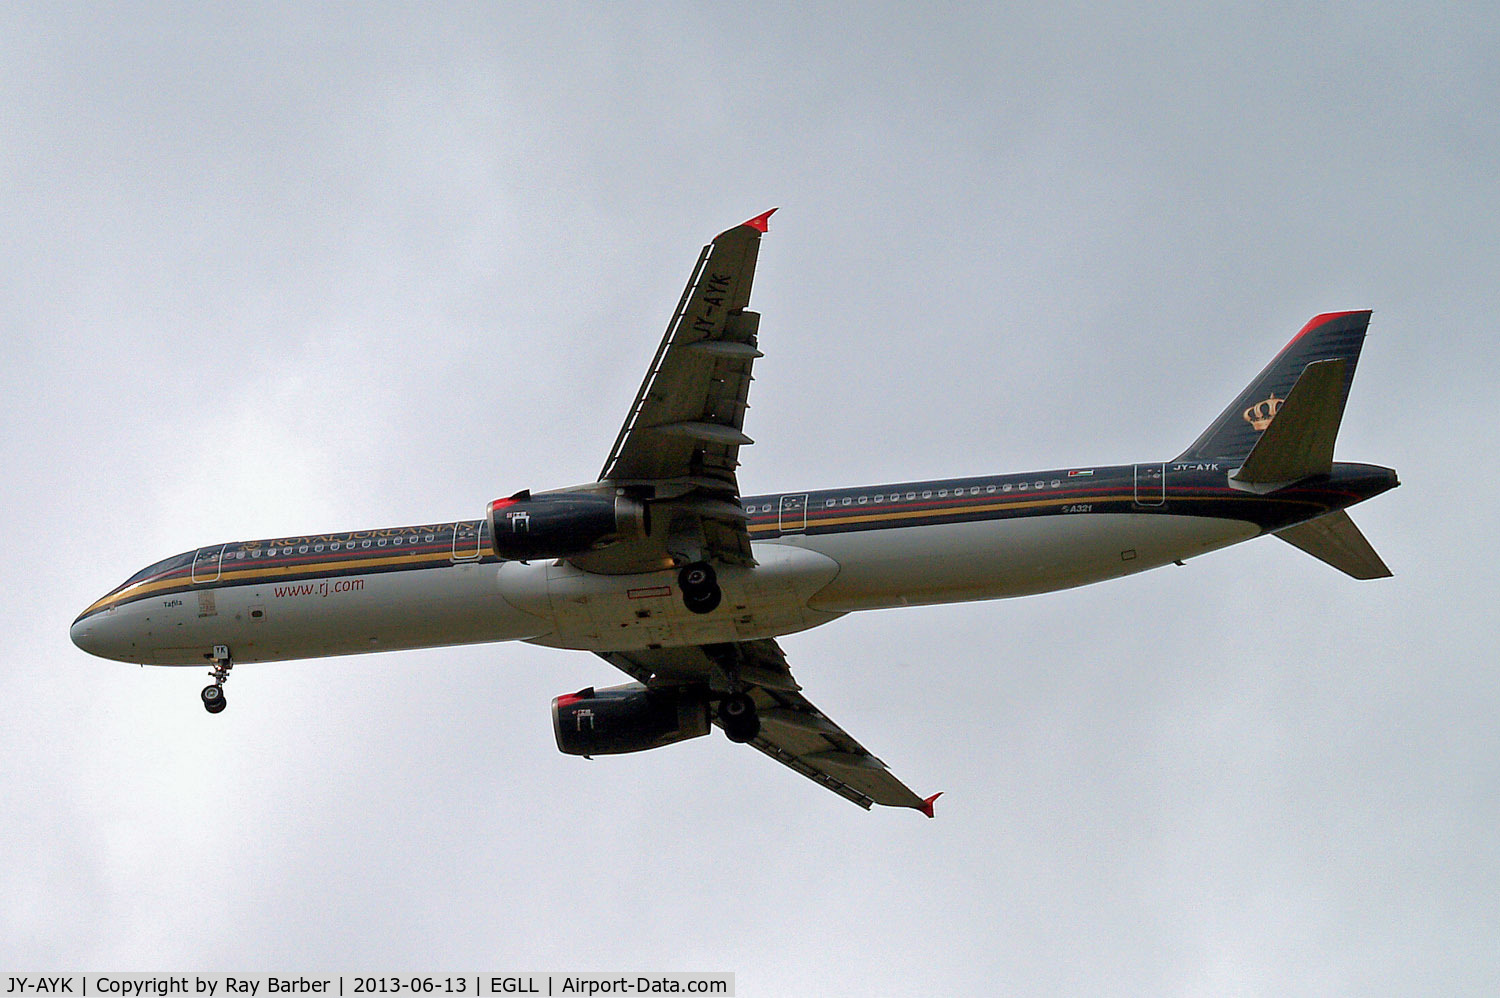 JY-AYK, 2008 Airbus A321-231 C/N 3522, Airbus A321-231 [3522] (Royal Jordanian Airlines) Home~G 13/06/2013. On approach 27R.